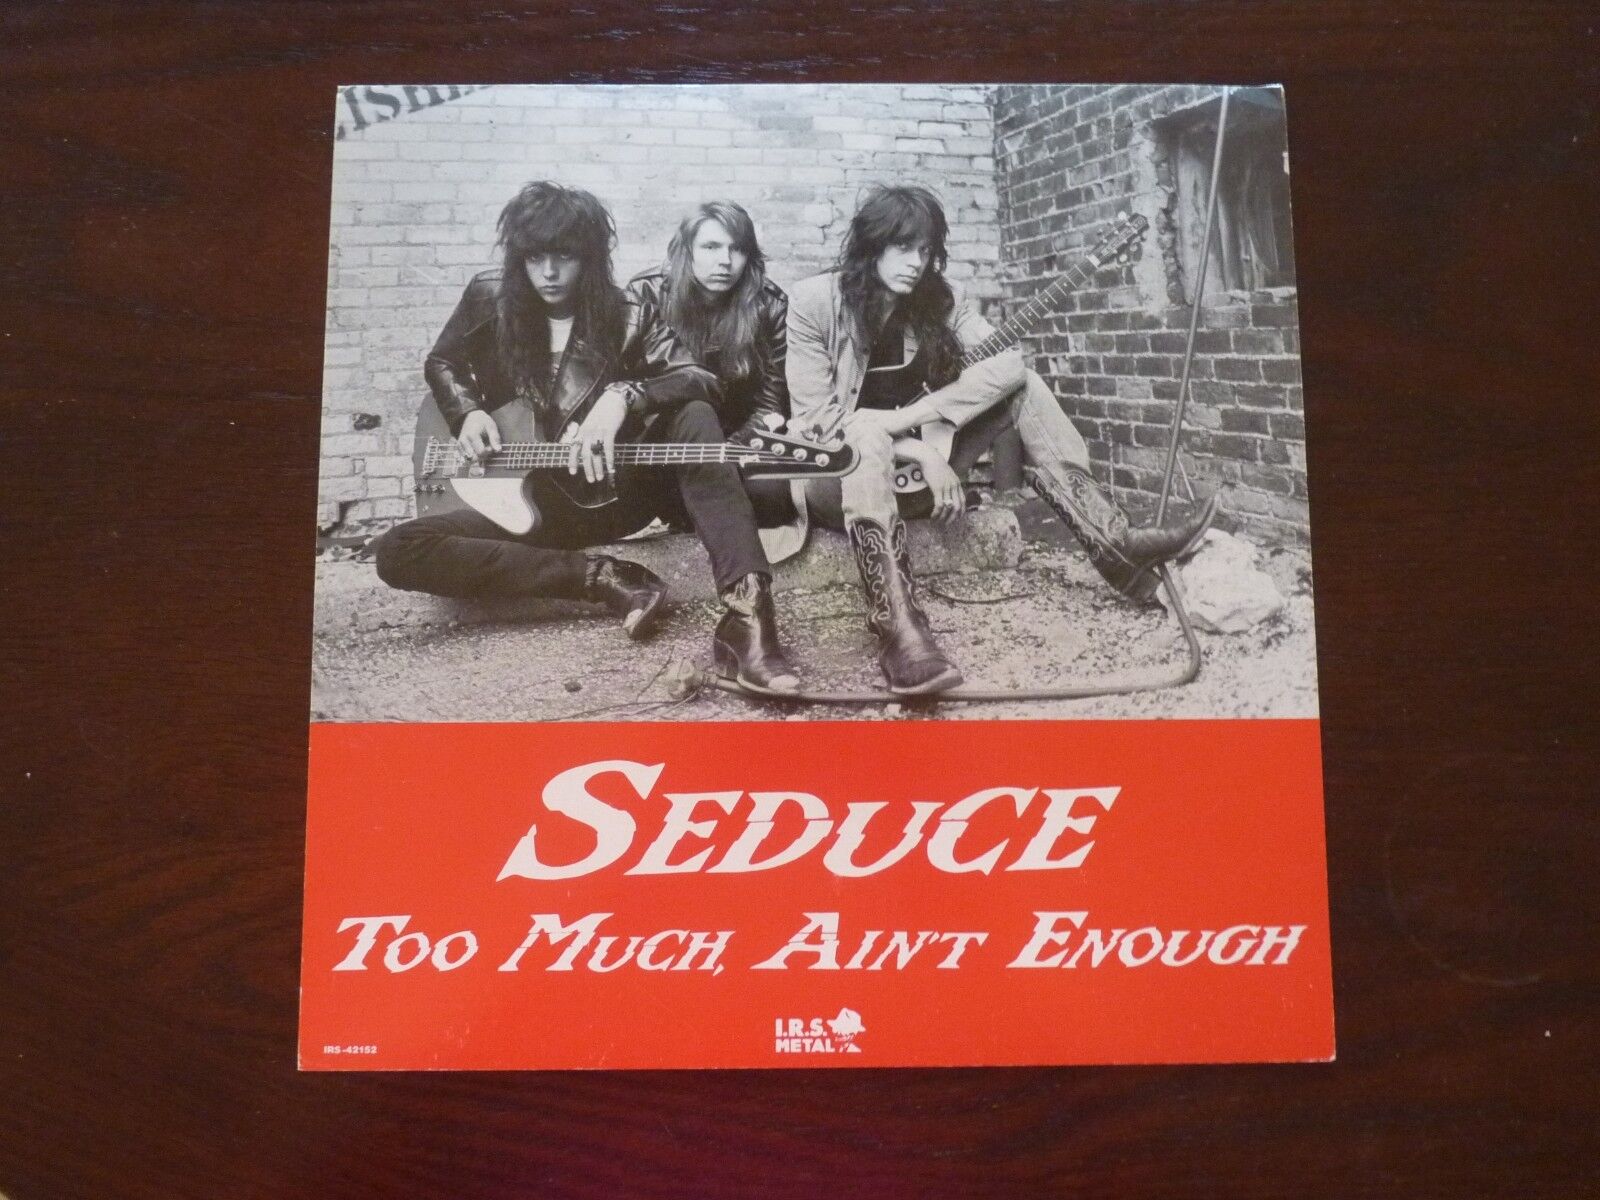 Seduce Too Much, Ain't Enough LP Record Photo Poster painting Flat 12x12 Poster